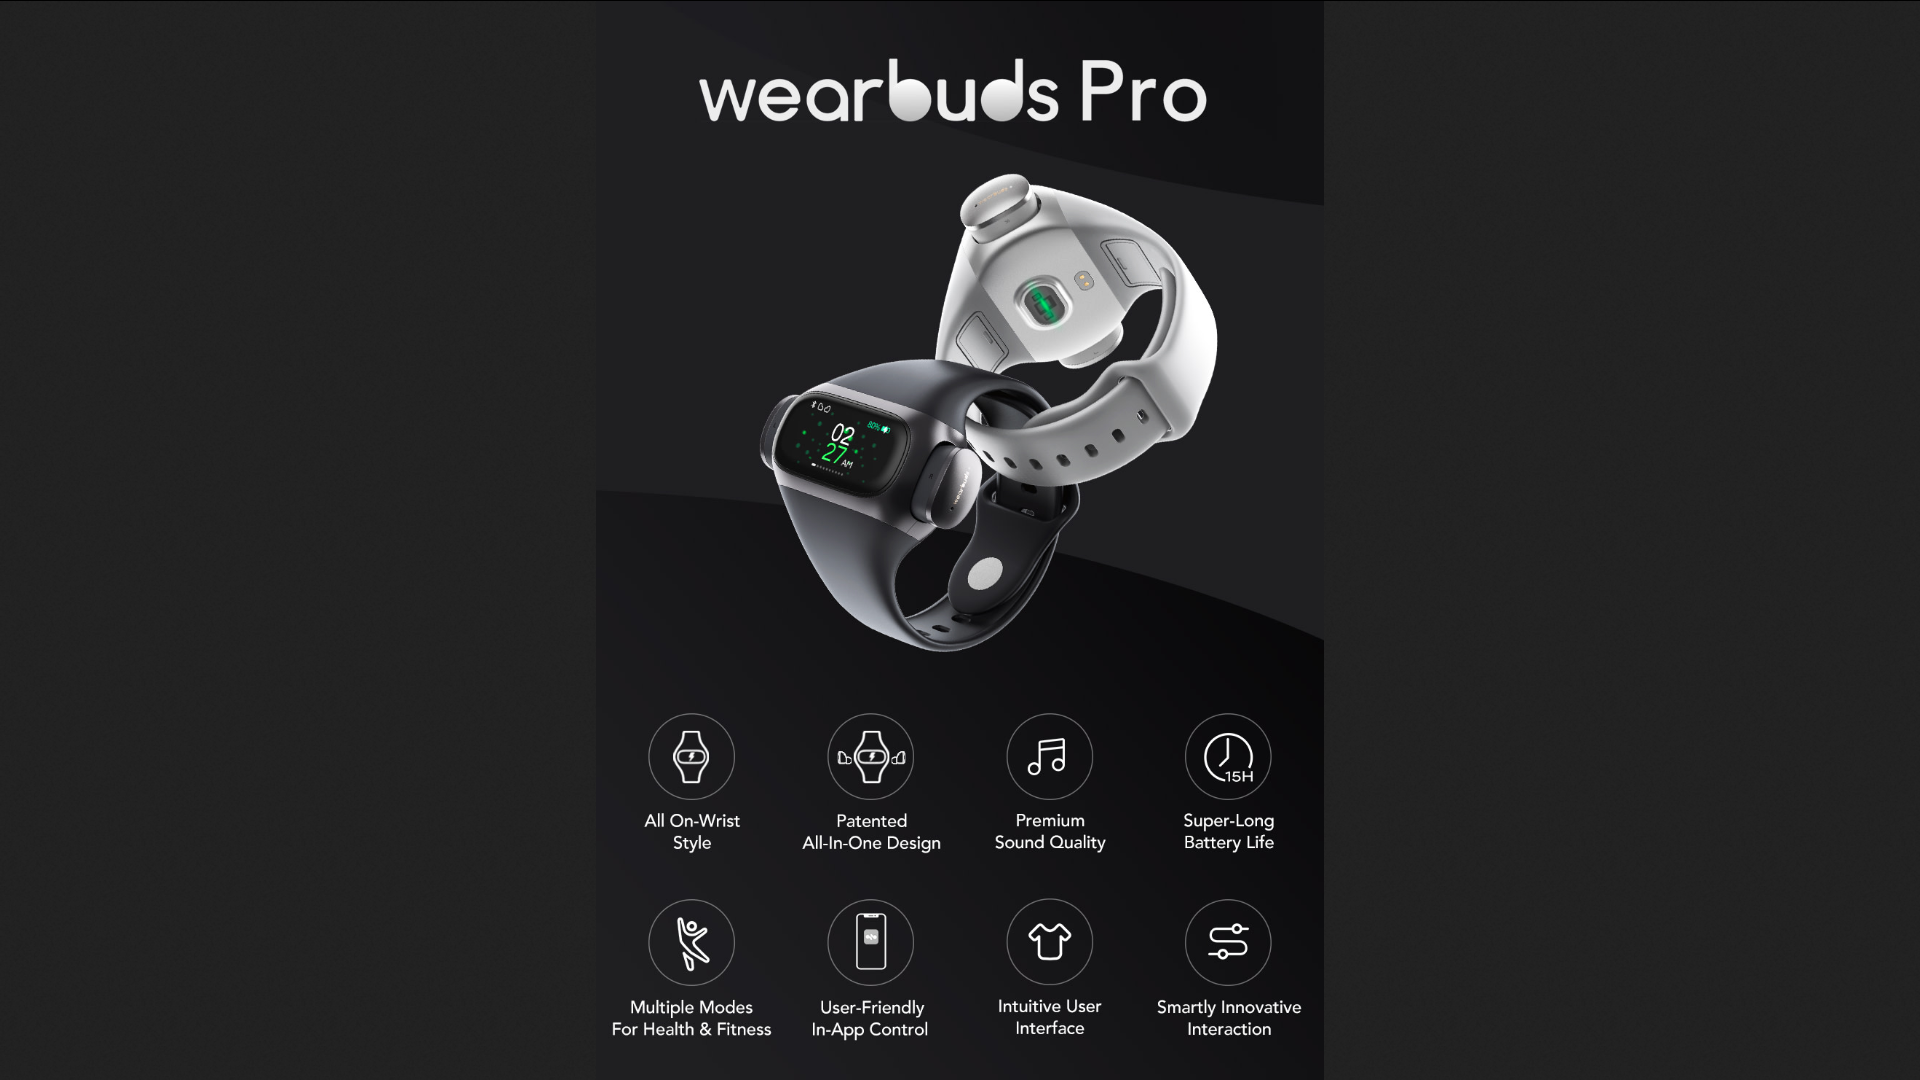 Redmi AirDots 2 announced: Budget TWS earphones with Bluetooth 5.0 and 7.2  mm sound drivers for 79 yuan (US$11) -  News